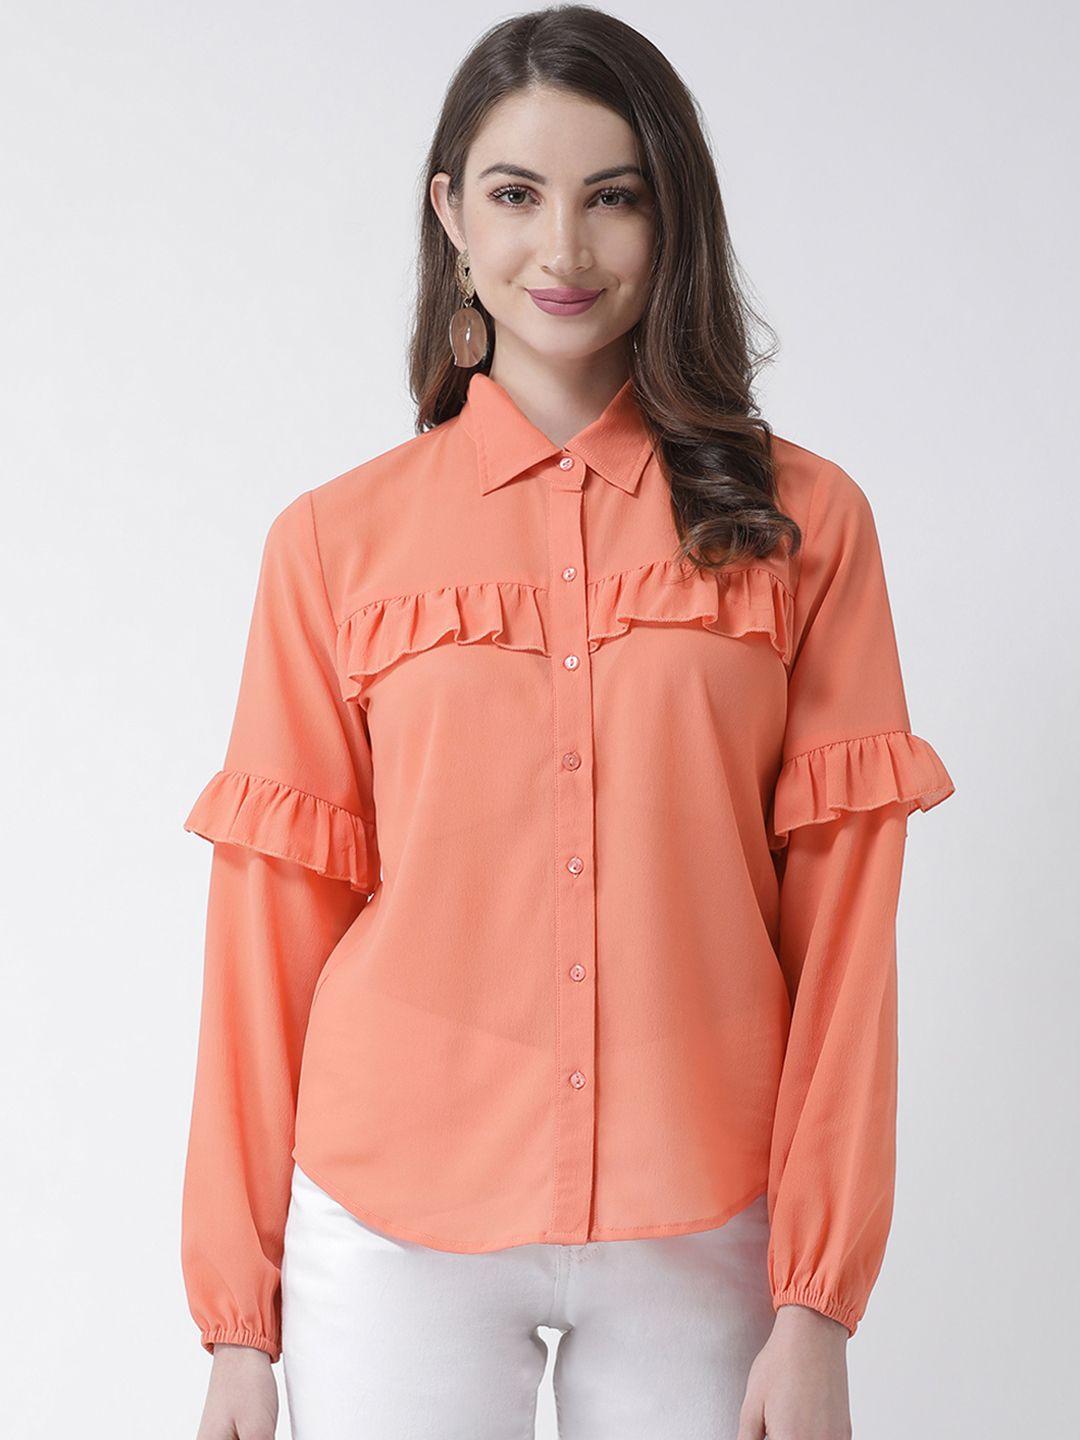 kassually-women-peach-coloured-regular-fit-solid-casual-shirt